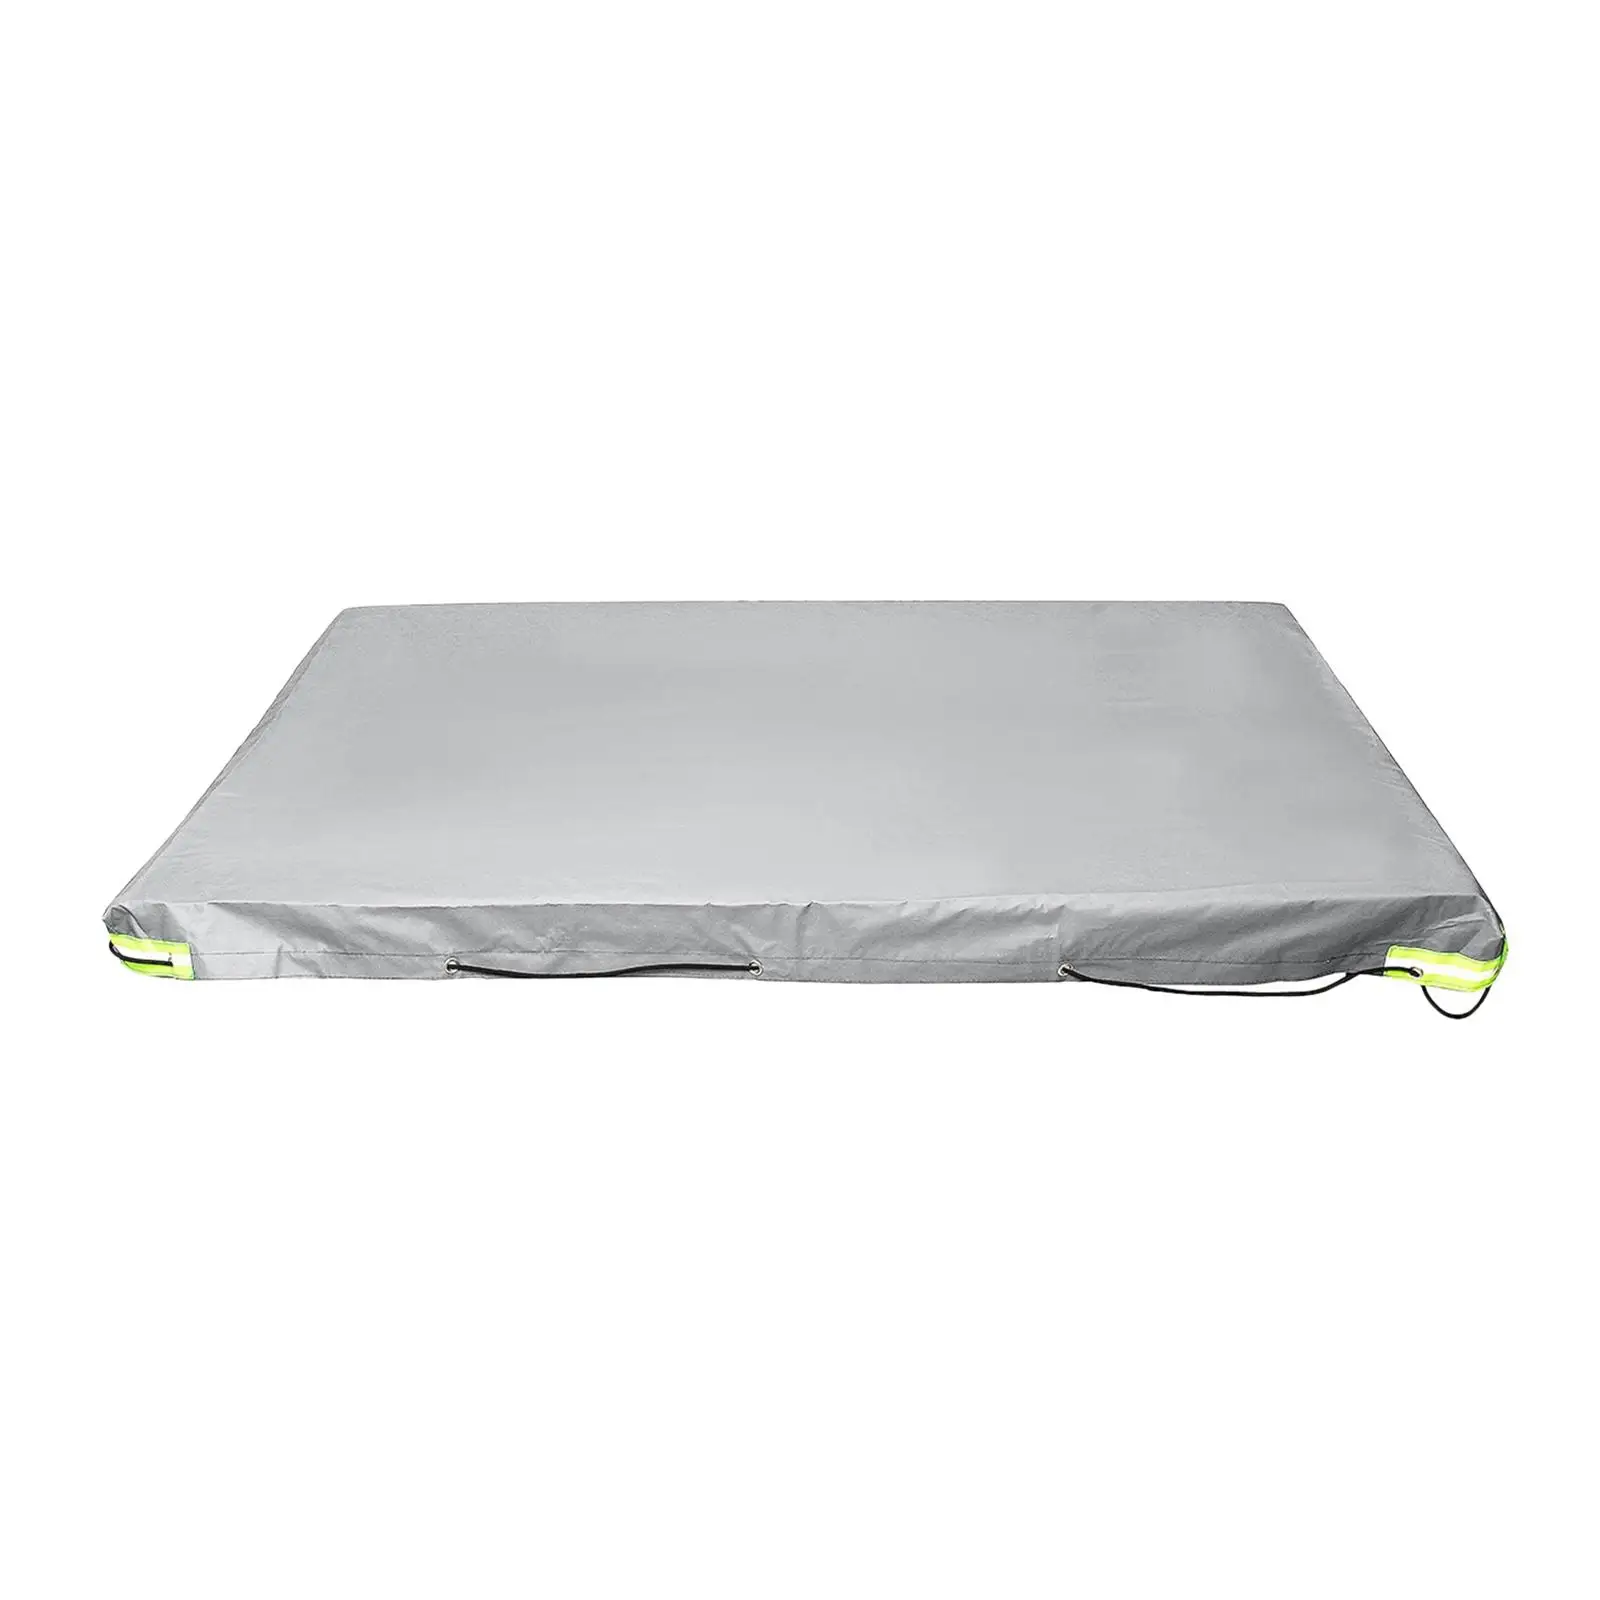 and Sun 72 x 48 x 5 inch Trailer Cargo Cover Waterproof Heavy Duty Truck Cargo Tarp Cargo Cover for Pickup Truck Bed Snow Rain Protects Your Trailer Cargo from Wind 